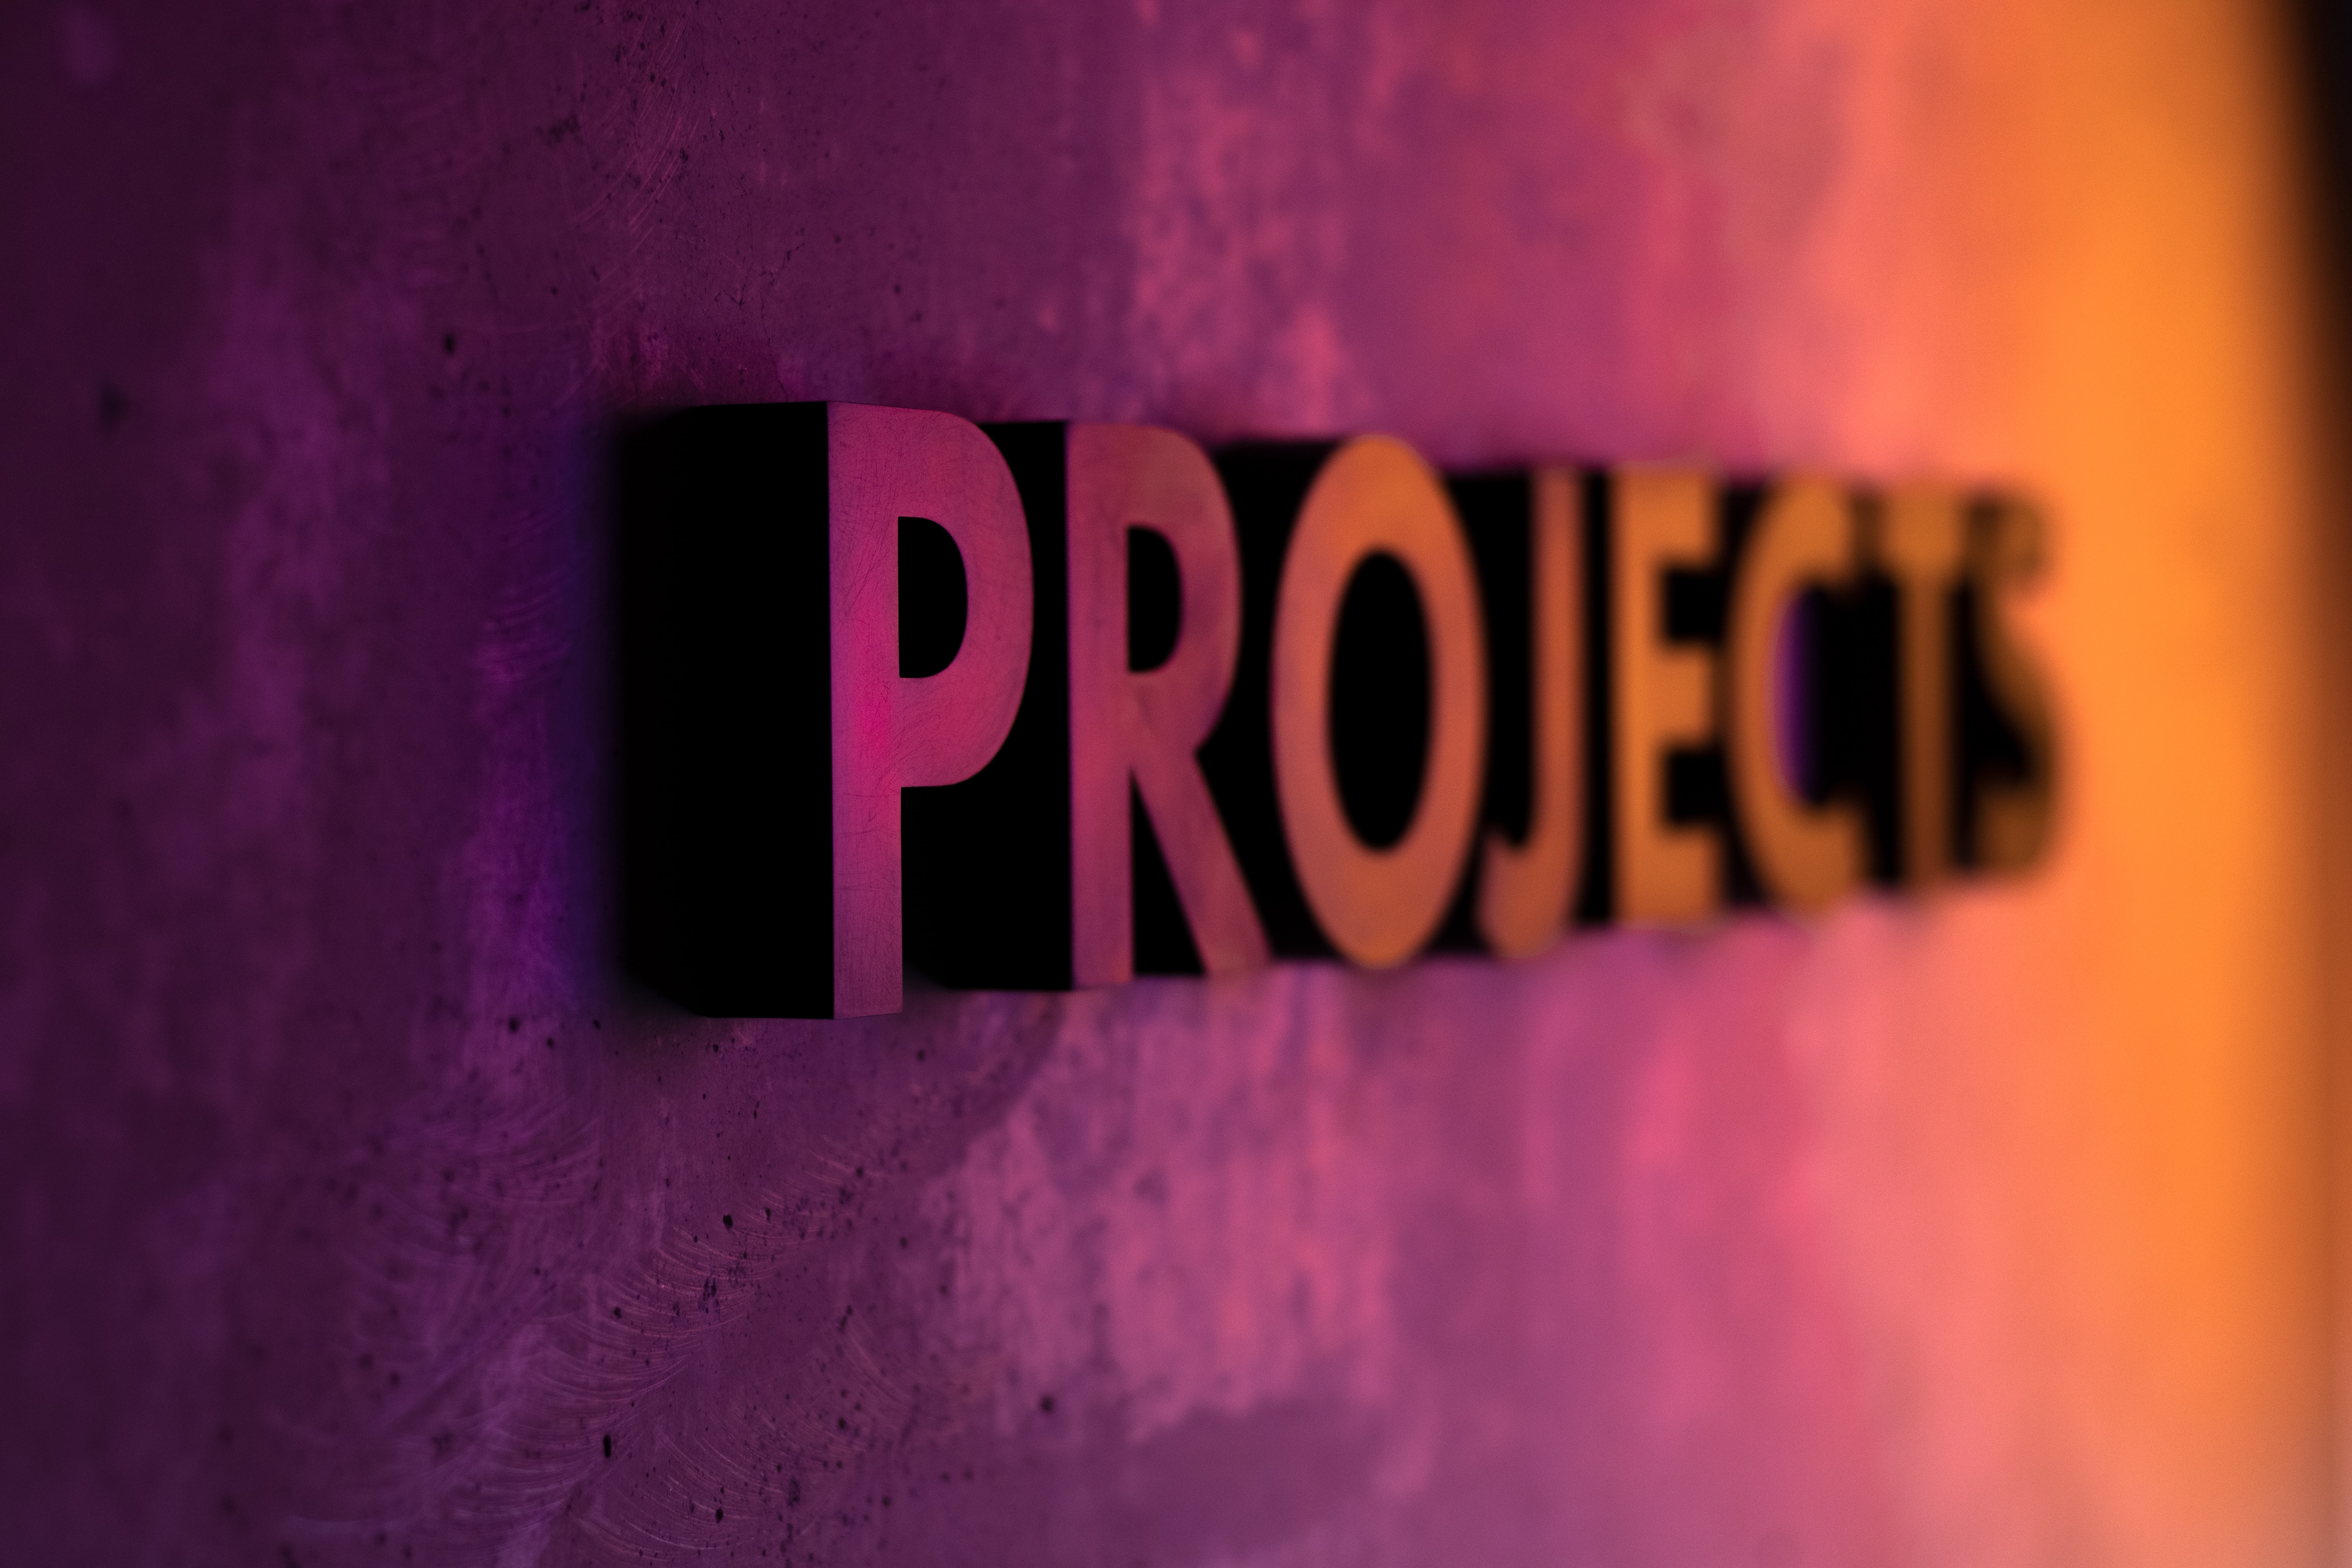 the word &quot;projects&quot; appears in 3D from a wall